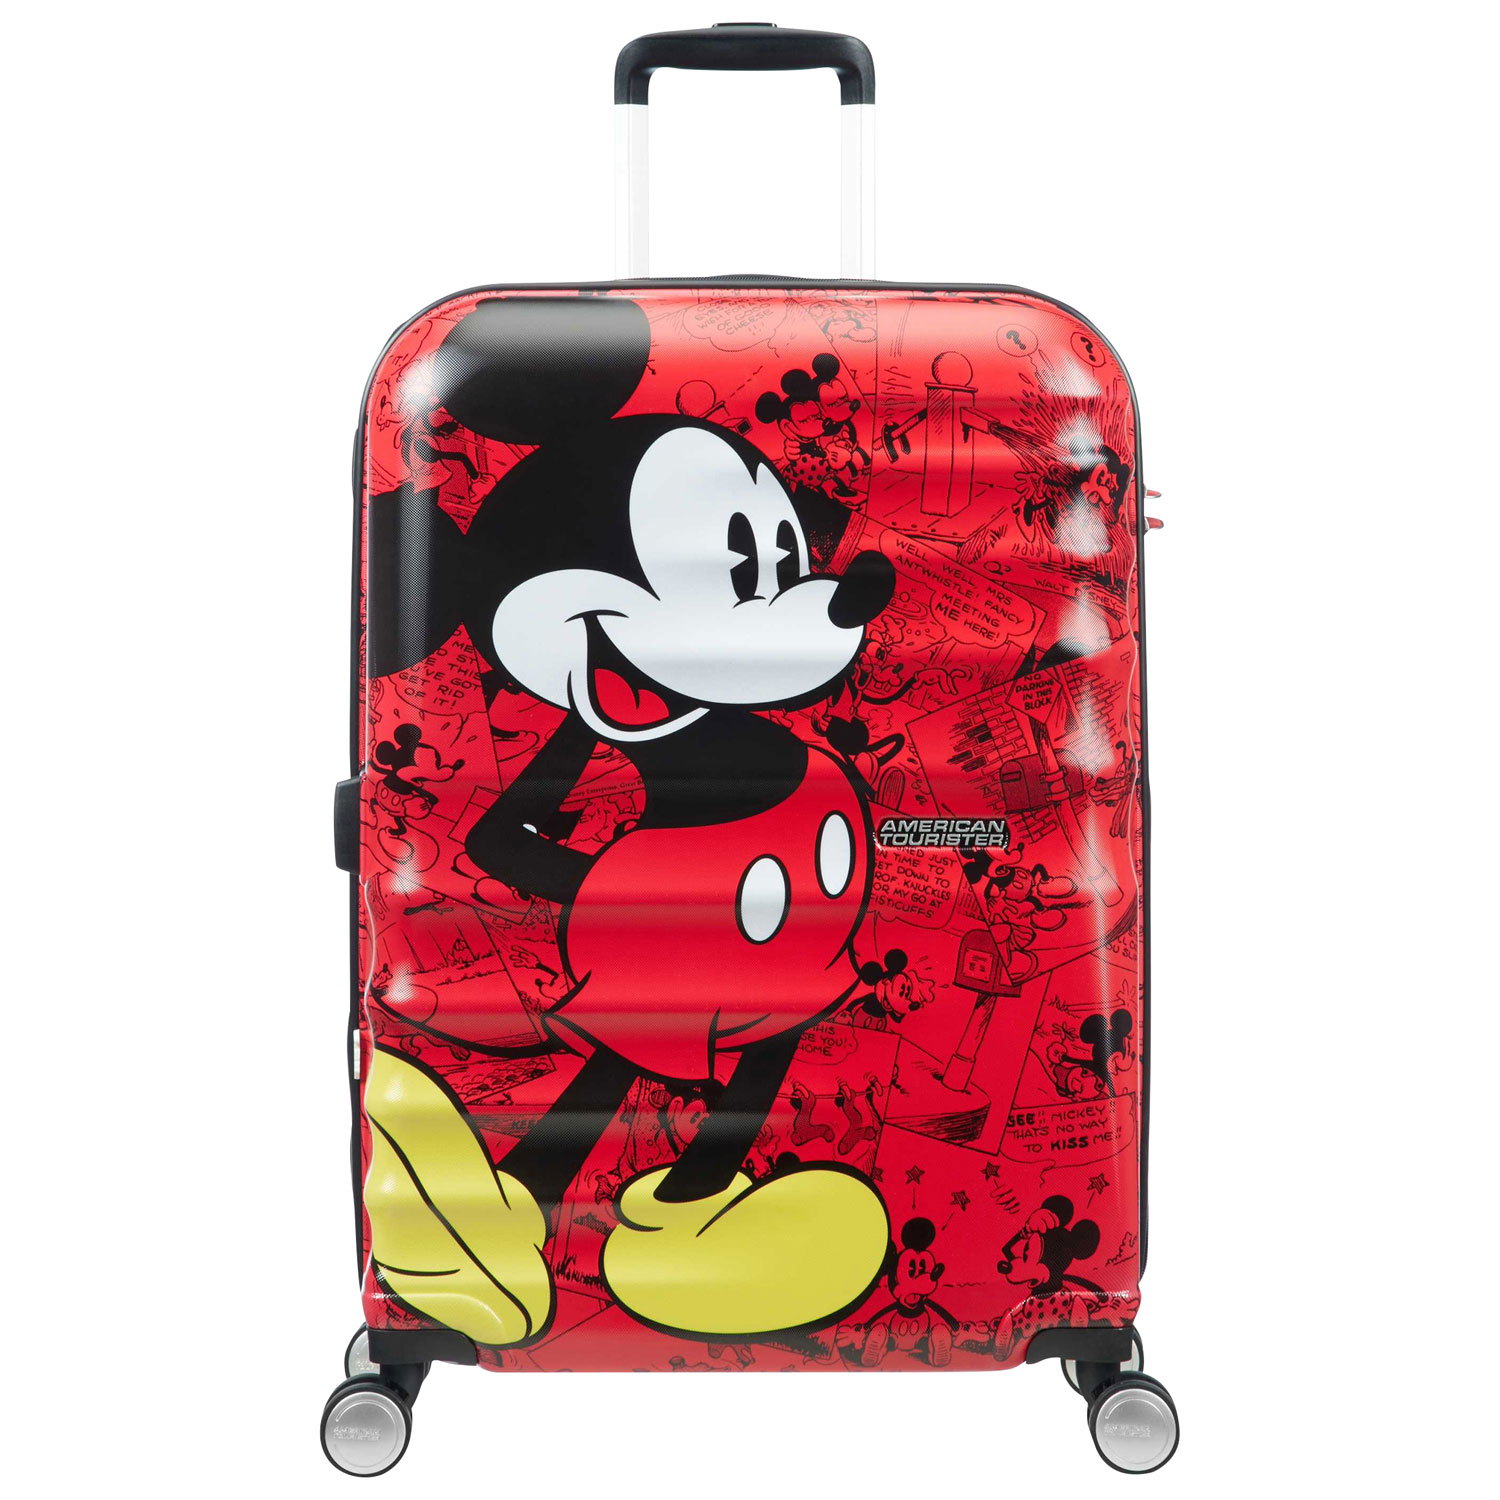 American Tourister Disney Wavebreaker 25" Hard Side Luggage - Red/Mickey Mouse